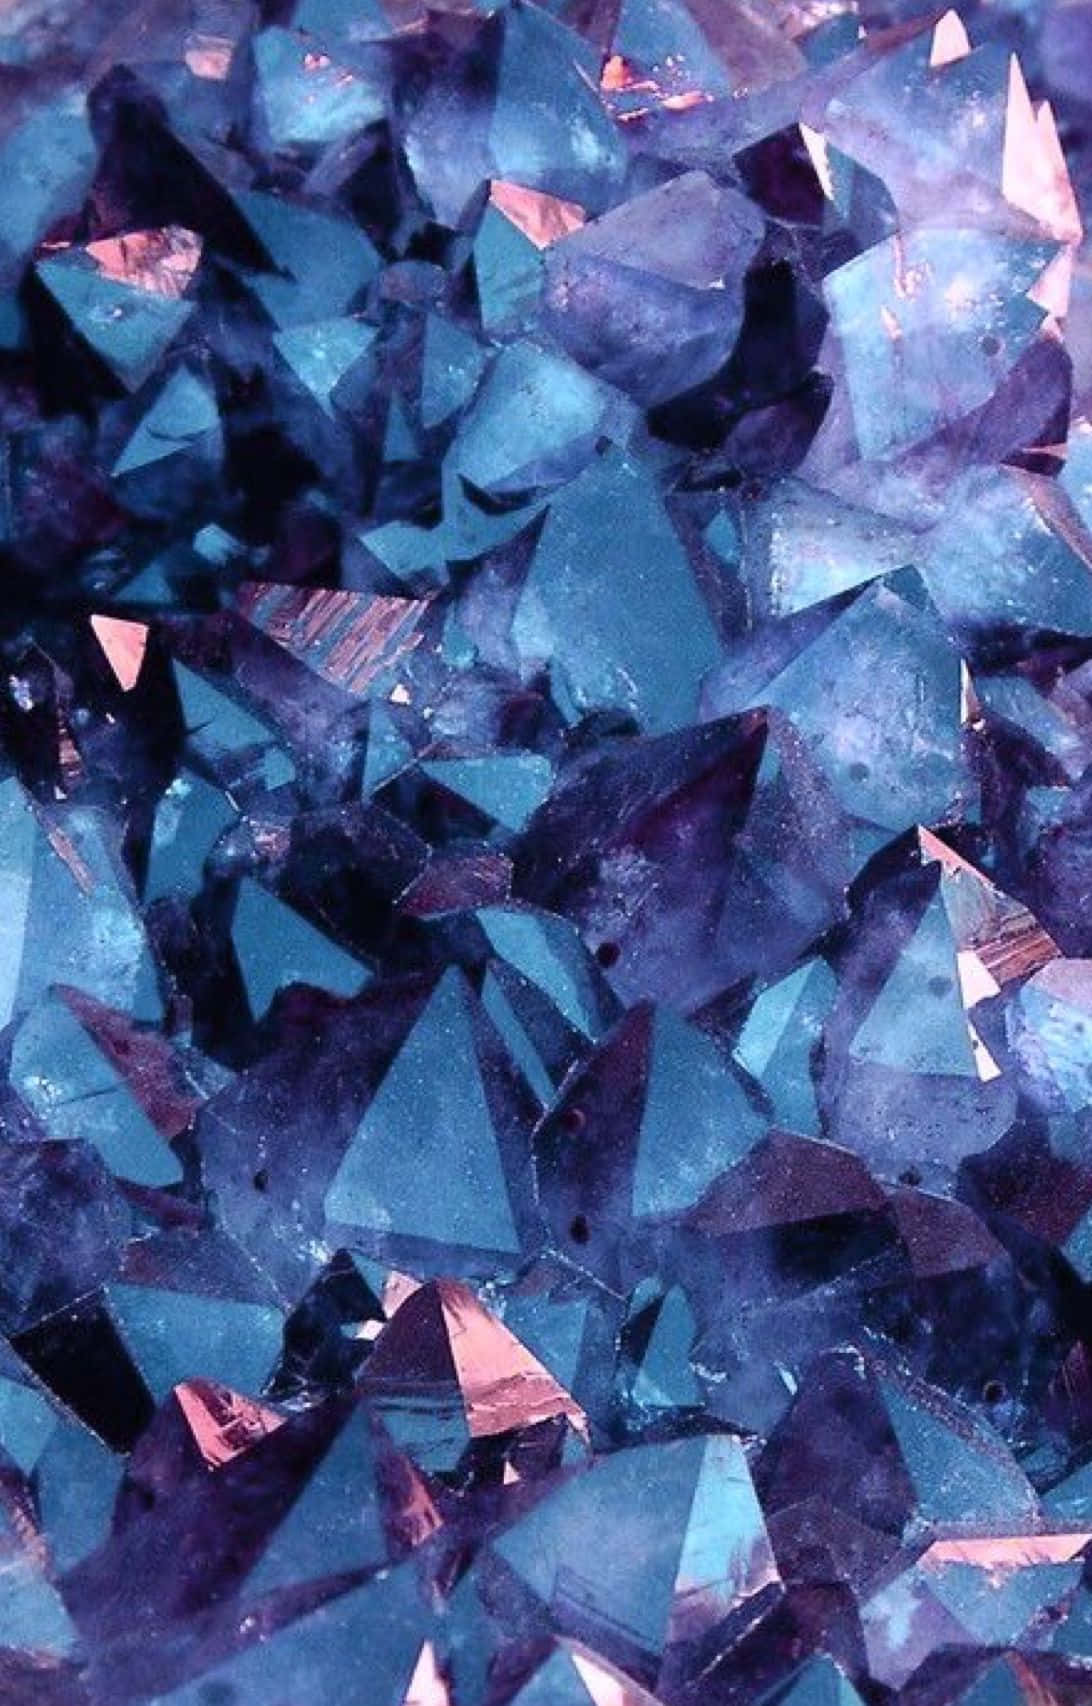 A close up of purple and blue crystals - Diamond